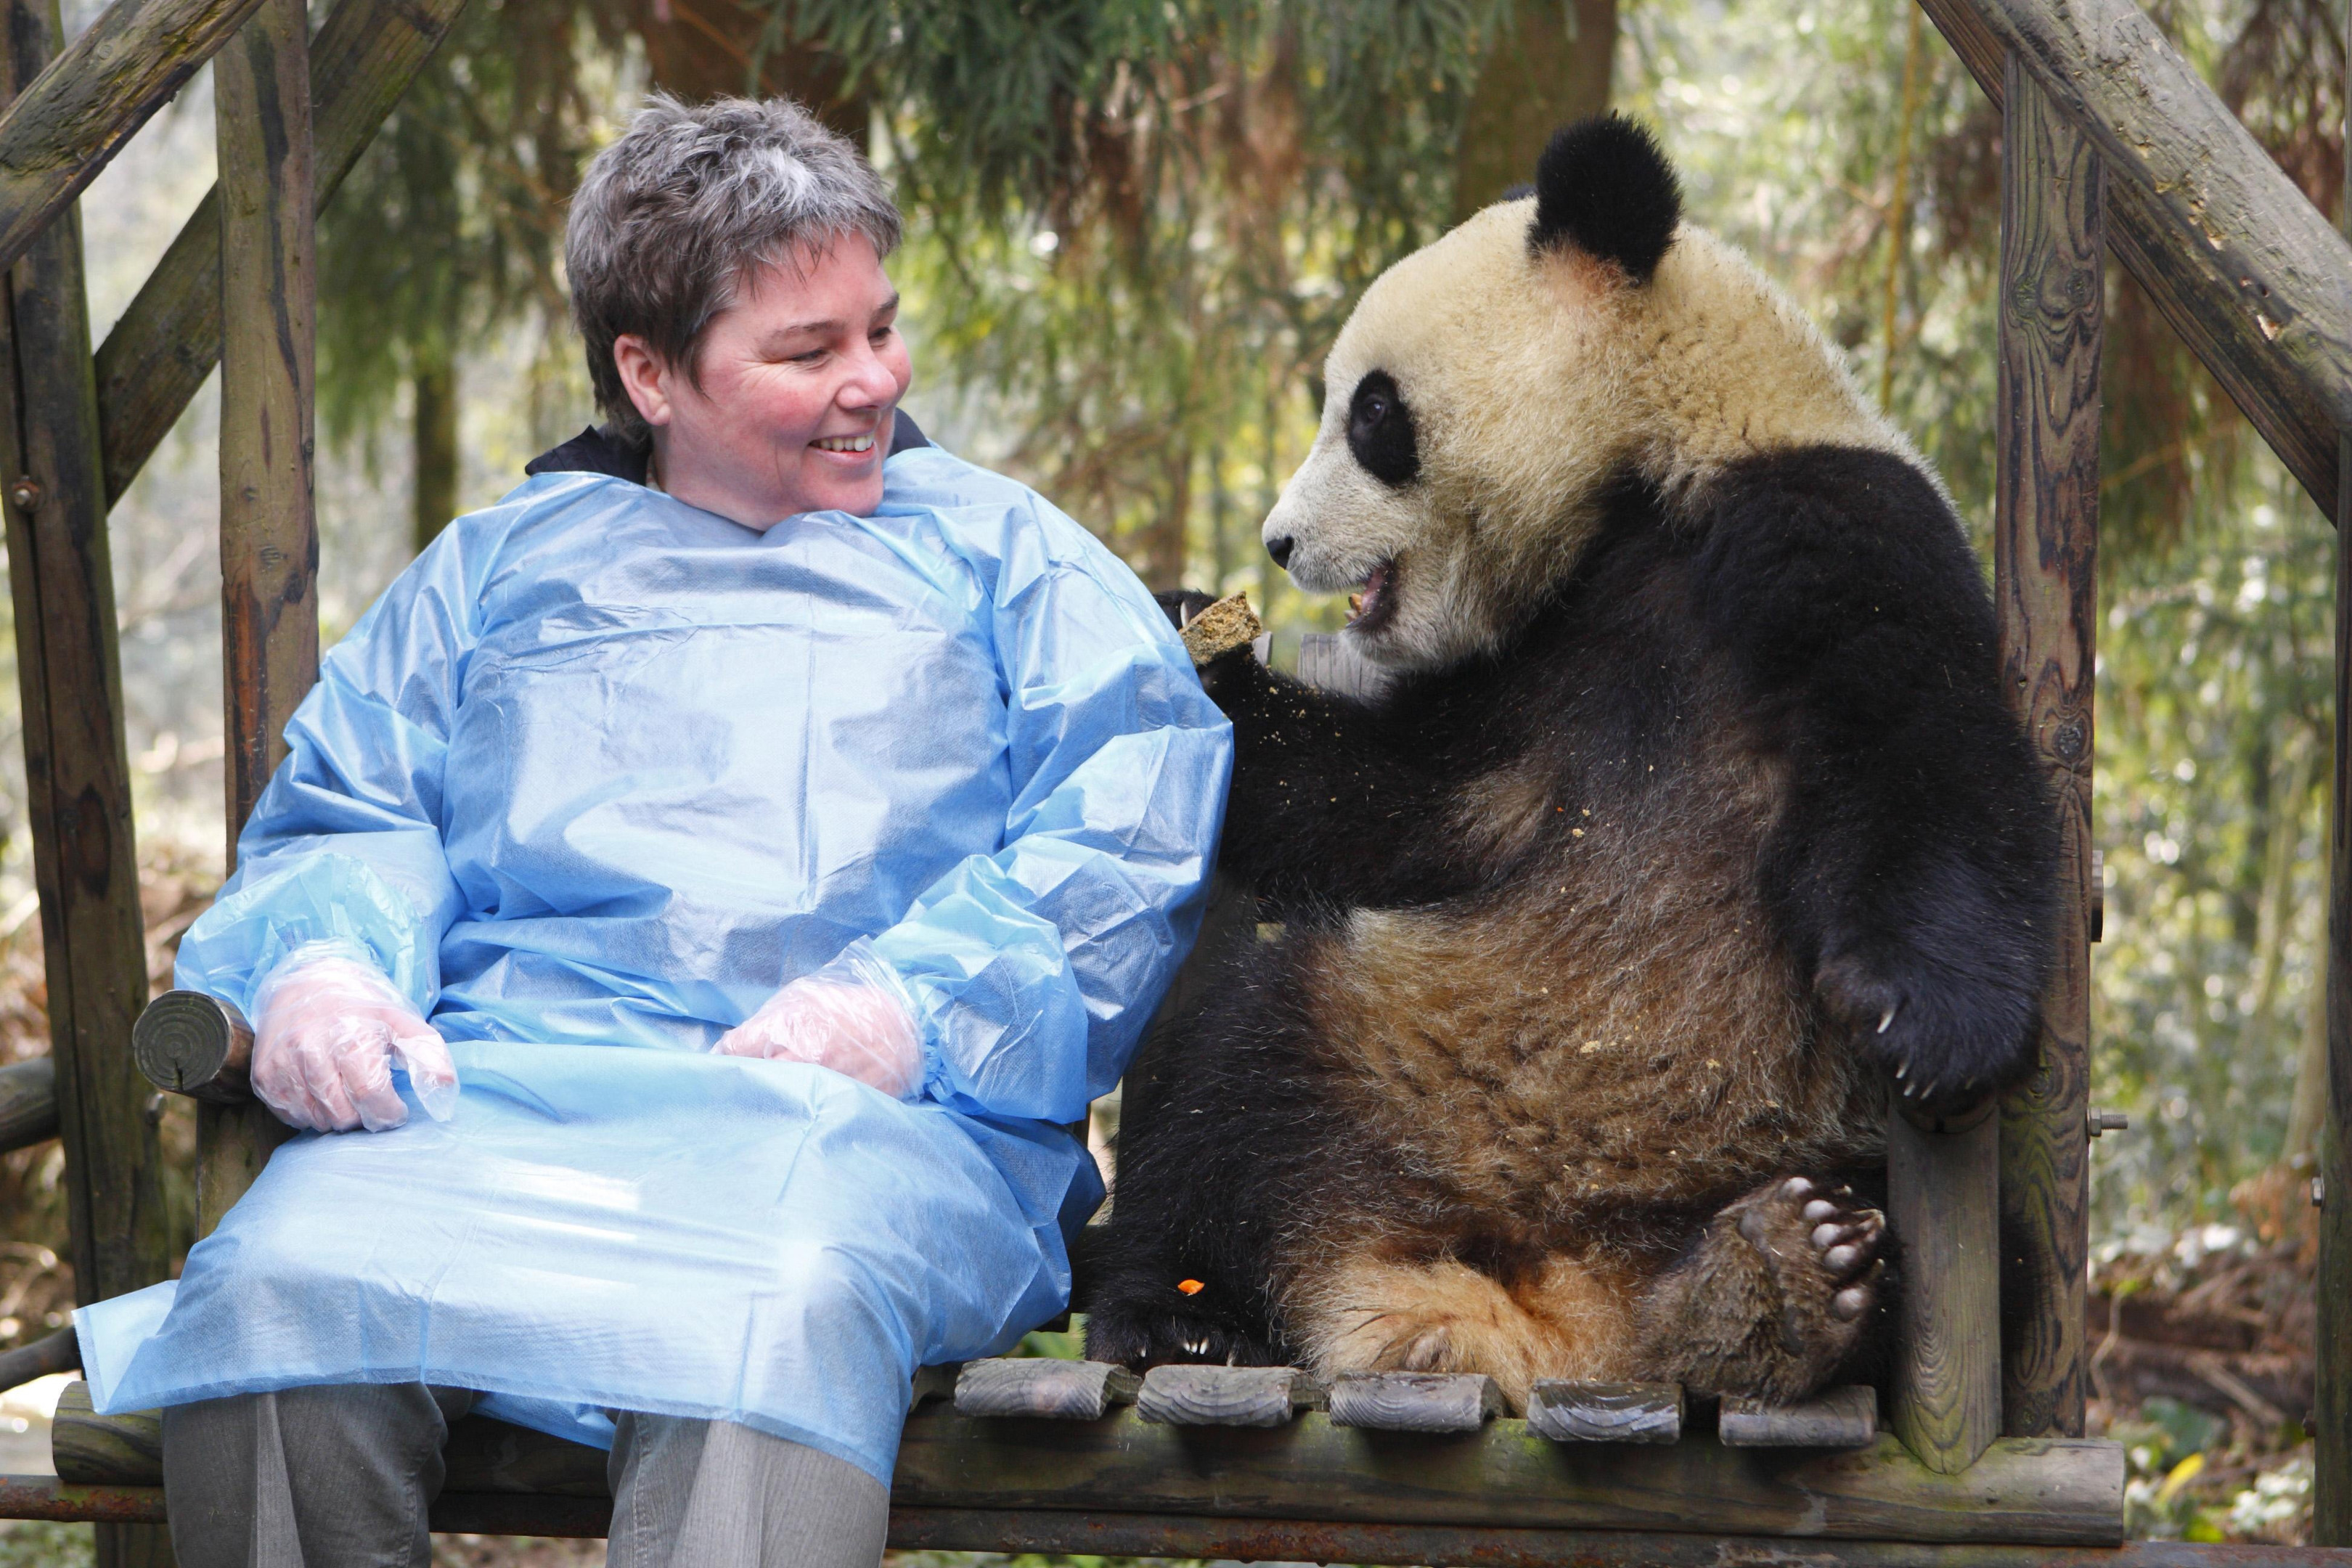 Alison MacLean, Team Leader of the Carnivore Section at Edinburgh Zoo, meets a young Giant Panda at the Bifengxia Panda Centre near the city of Ya'an in Sichuan Province, China (PA)